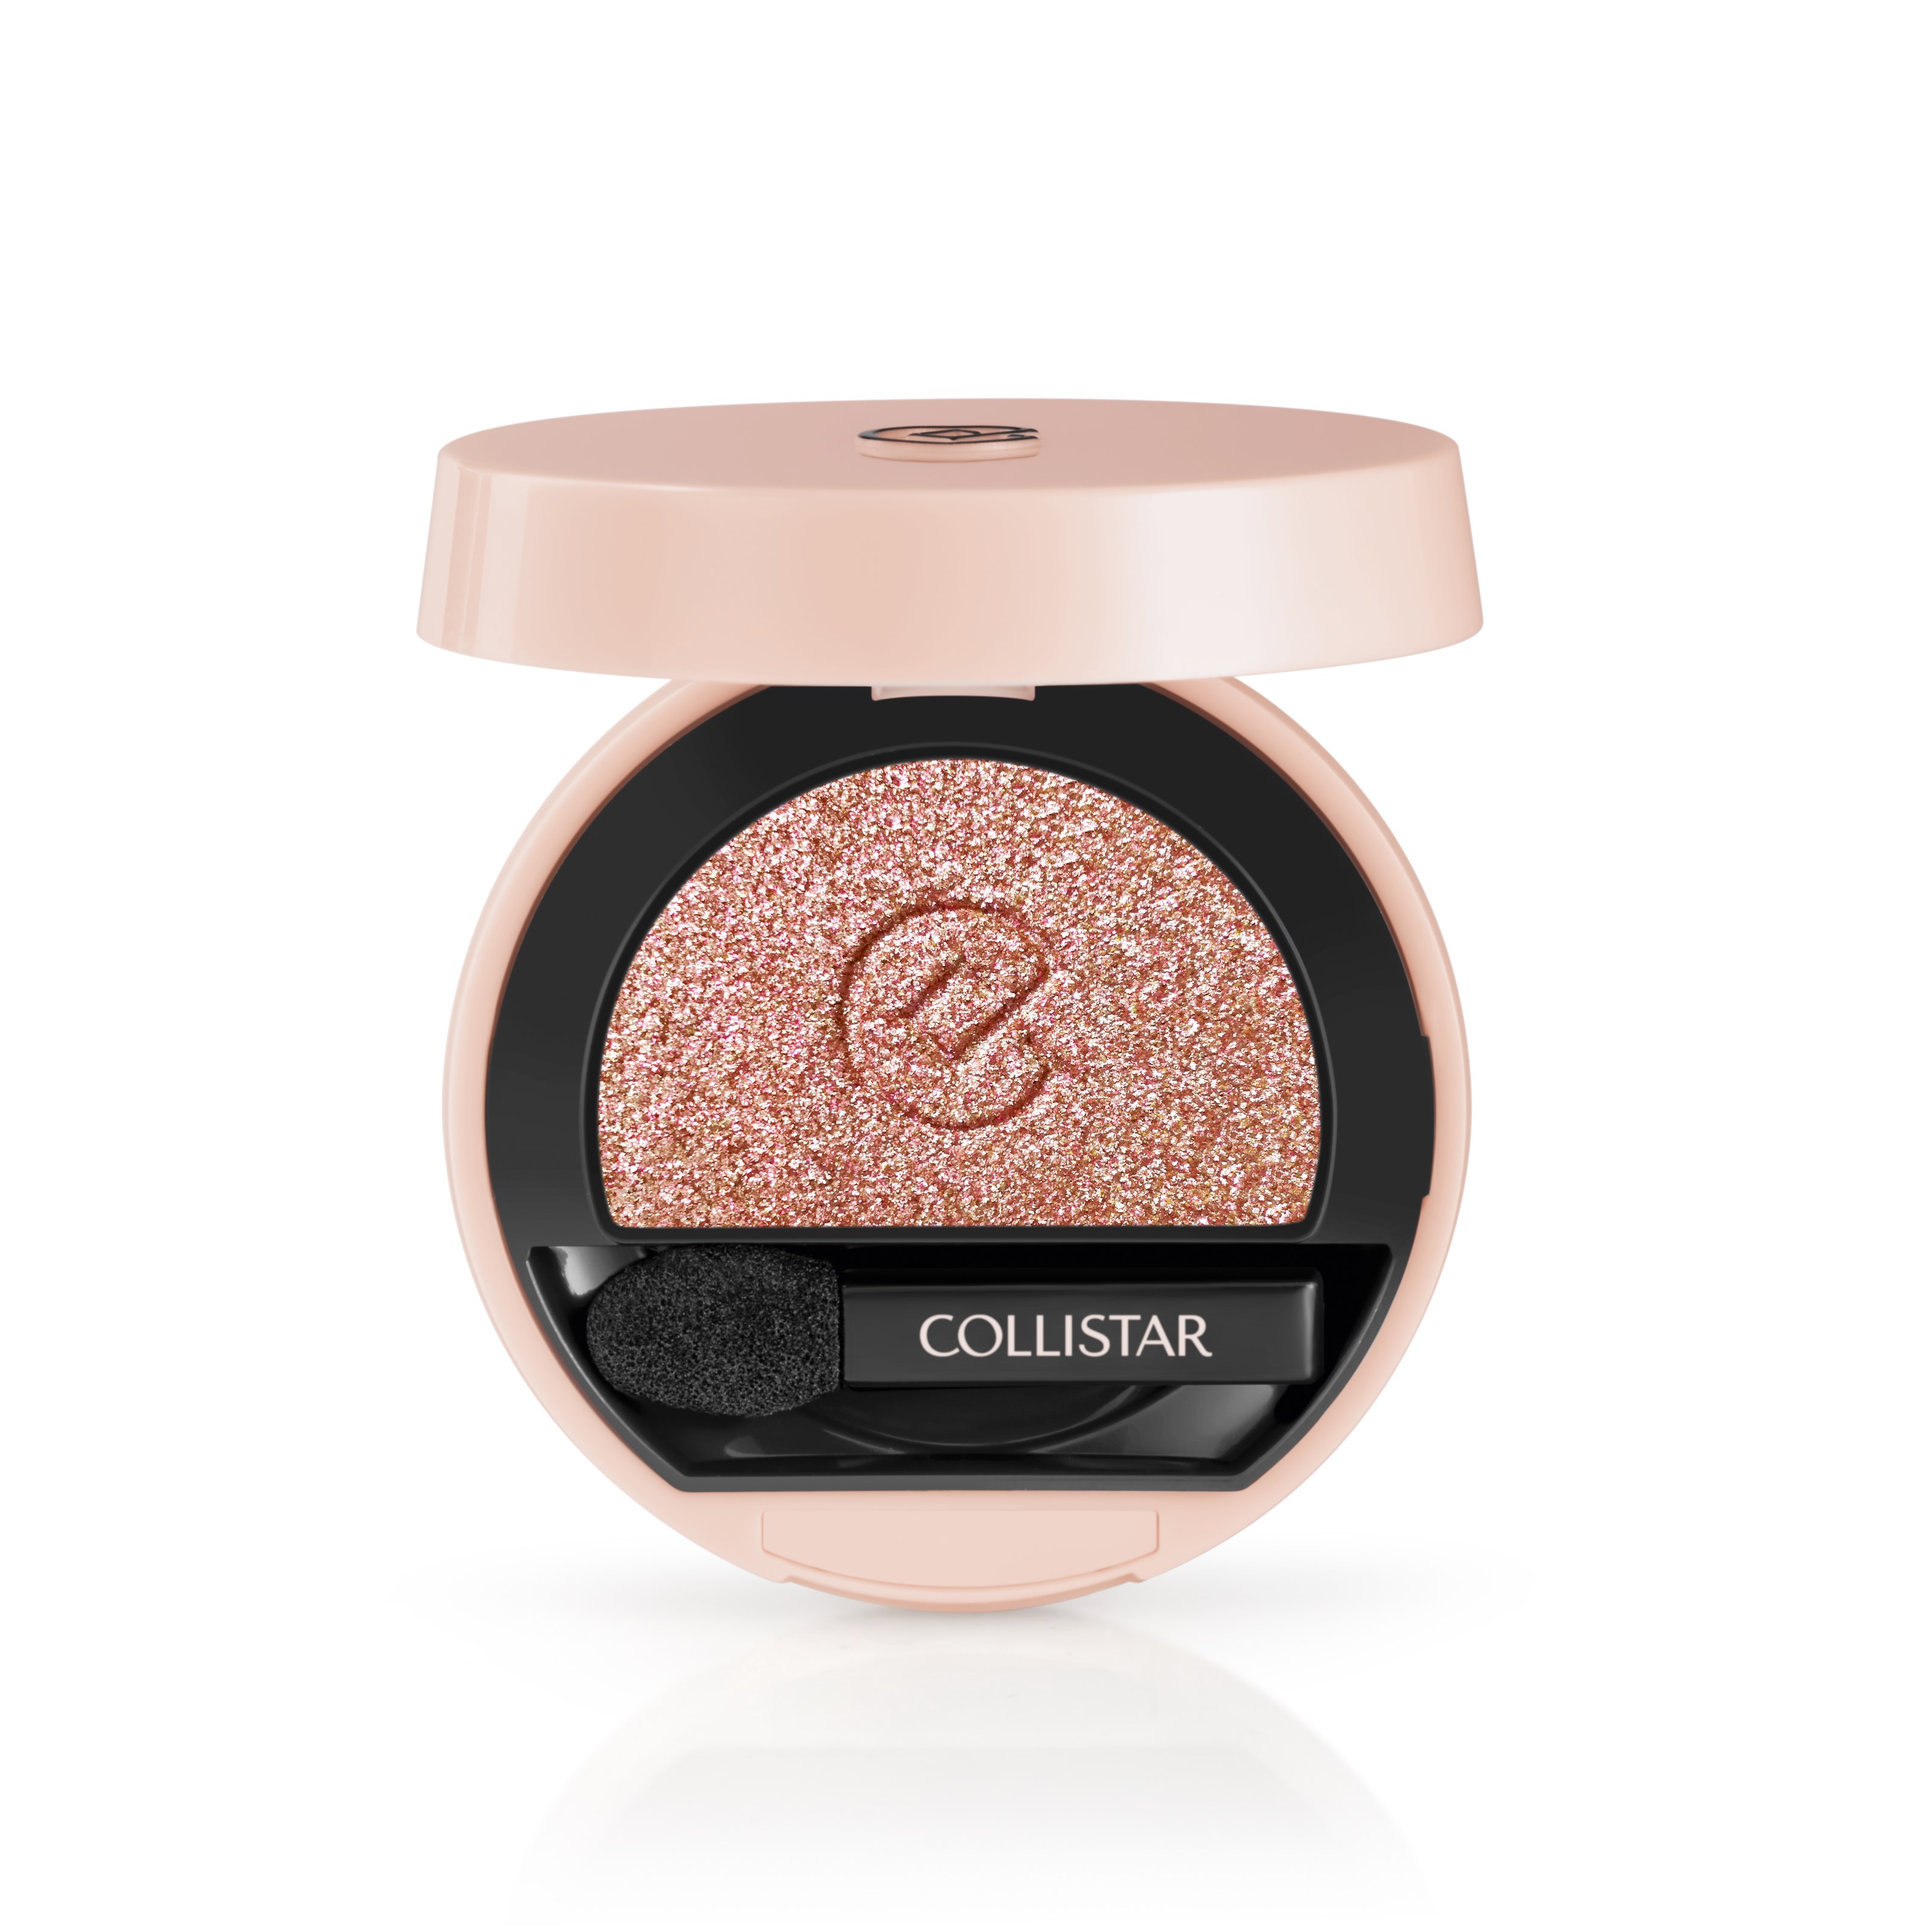 Läs mer om Collistar Impeccable Compact Eyeshadow 300 Pink Gold Frost